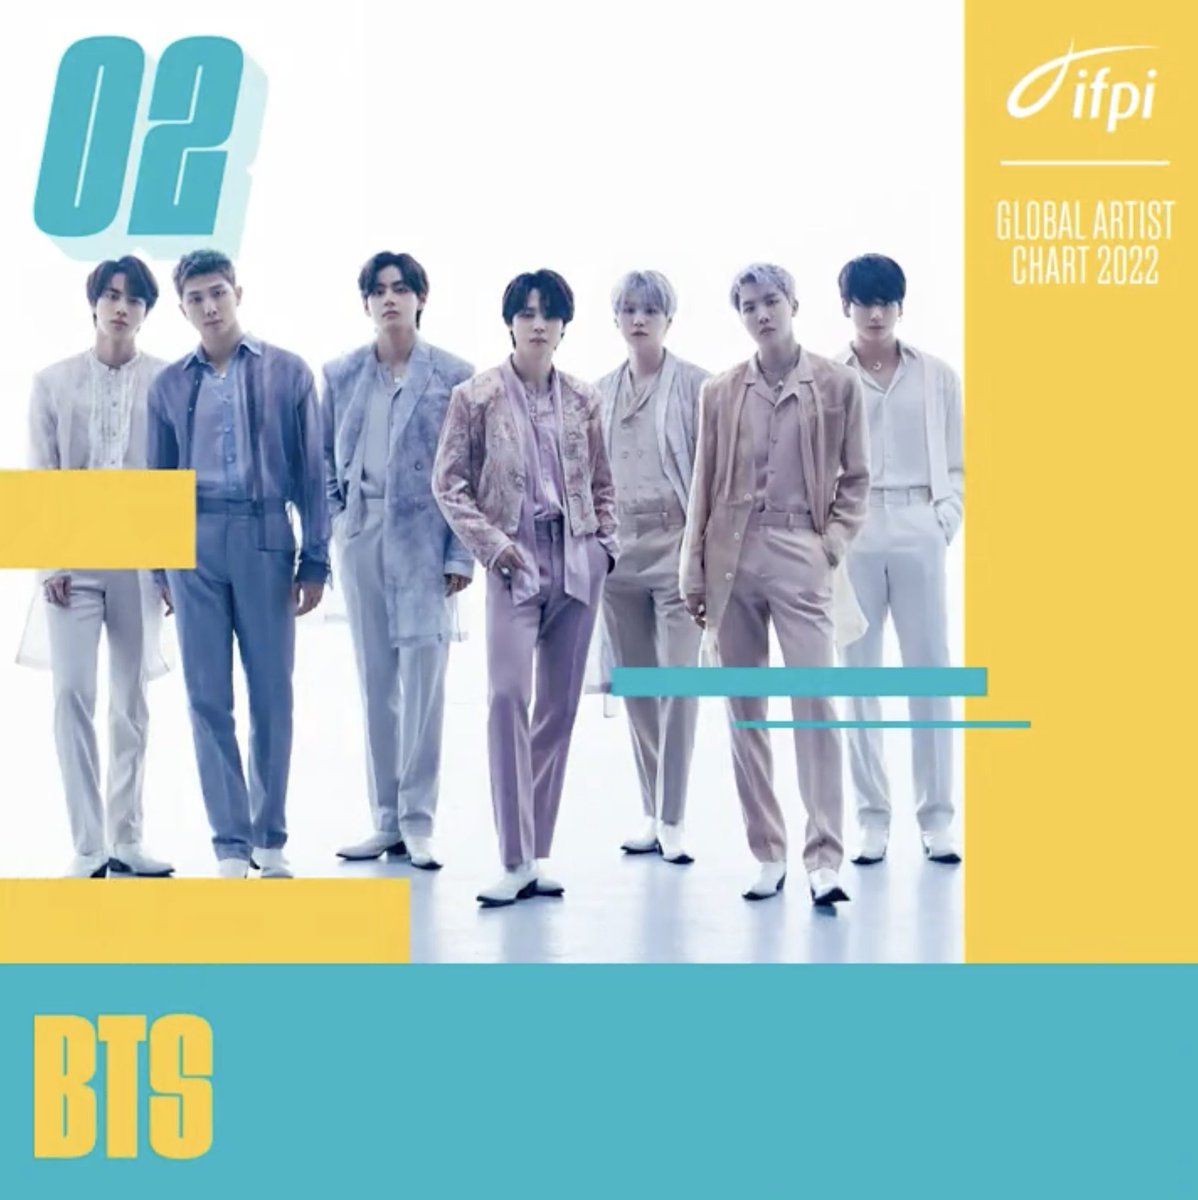 A humongous congratulations 🎉🥳❤️‍🔥❤️‍🔥to @BTS_twt charting in the Top 10 of BOTH IFPI’s 
Global Artist Chart #2  & 
Global Album Sales Chart #4, 
for 5 consecutive years in music HISTORY. 
Anthology album very sentimental to both BTS and Army. 
Am 
#BTSProof
#YetToCome